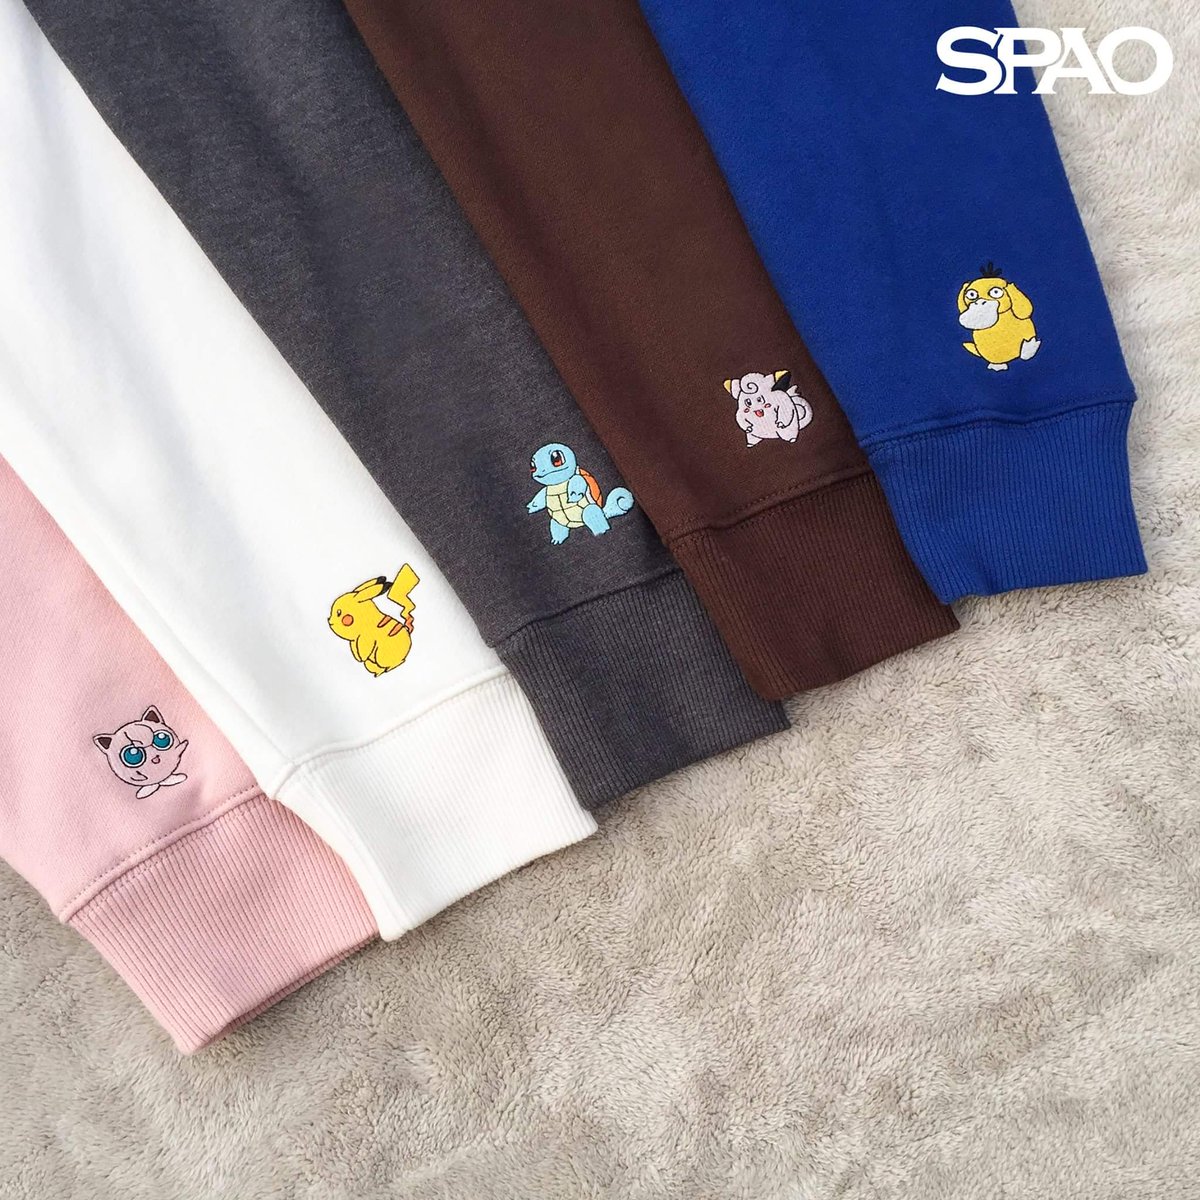 Storelic All Countries Pre Order Spaoxpokemon Hoodie All Sizes 1hoodie 60usd Send Dm For Orders Spao Pokemon Pikachu T Co 54t5fcjooi